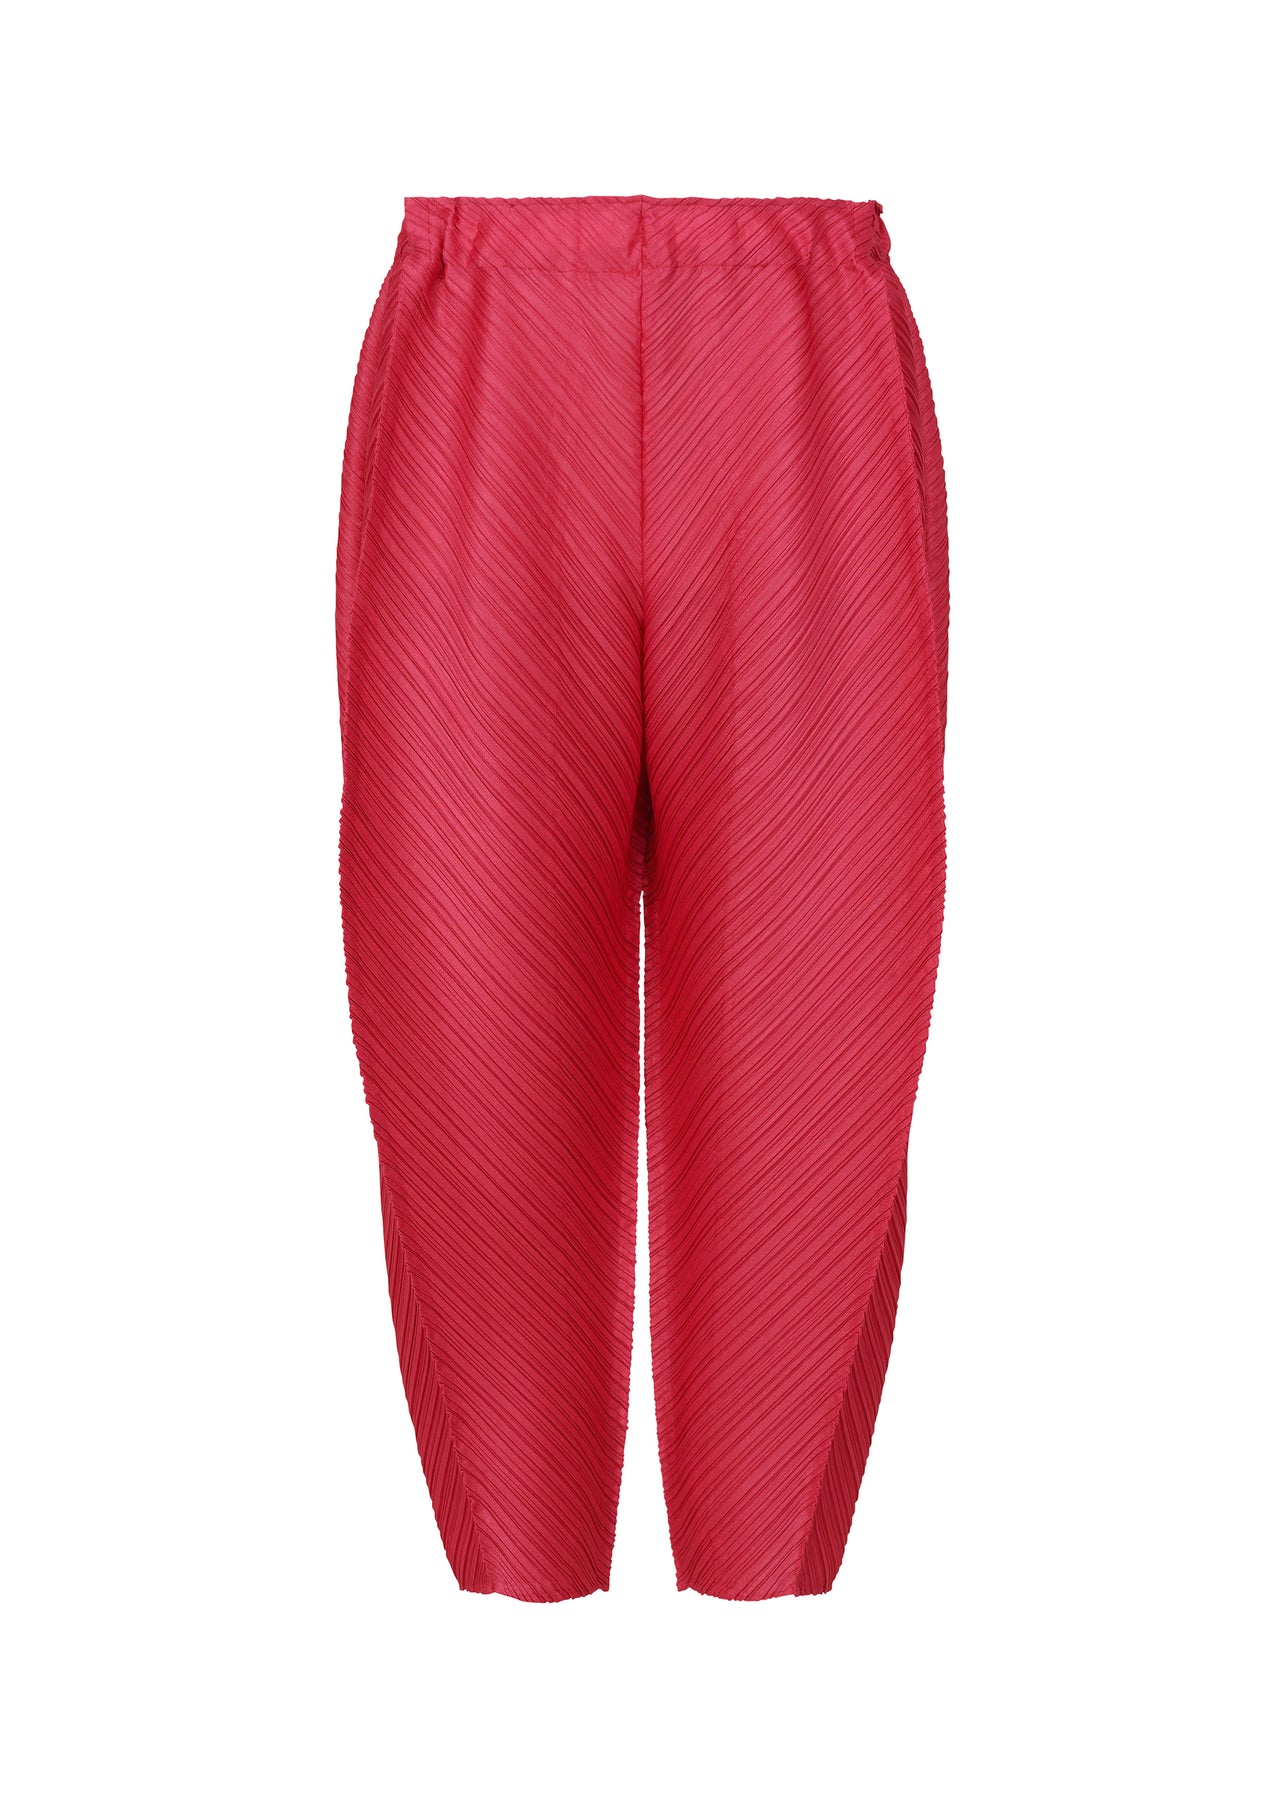 TROPICAL FRUITS PANTS | The official ISSEY MIYAKE ONLINE STORE ...